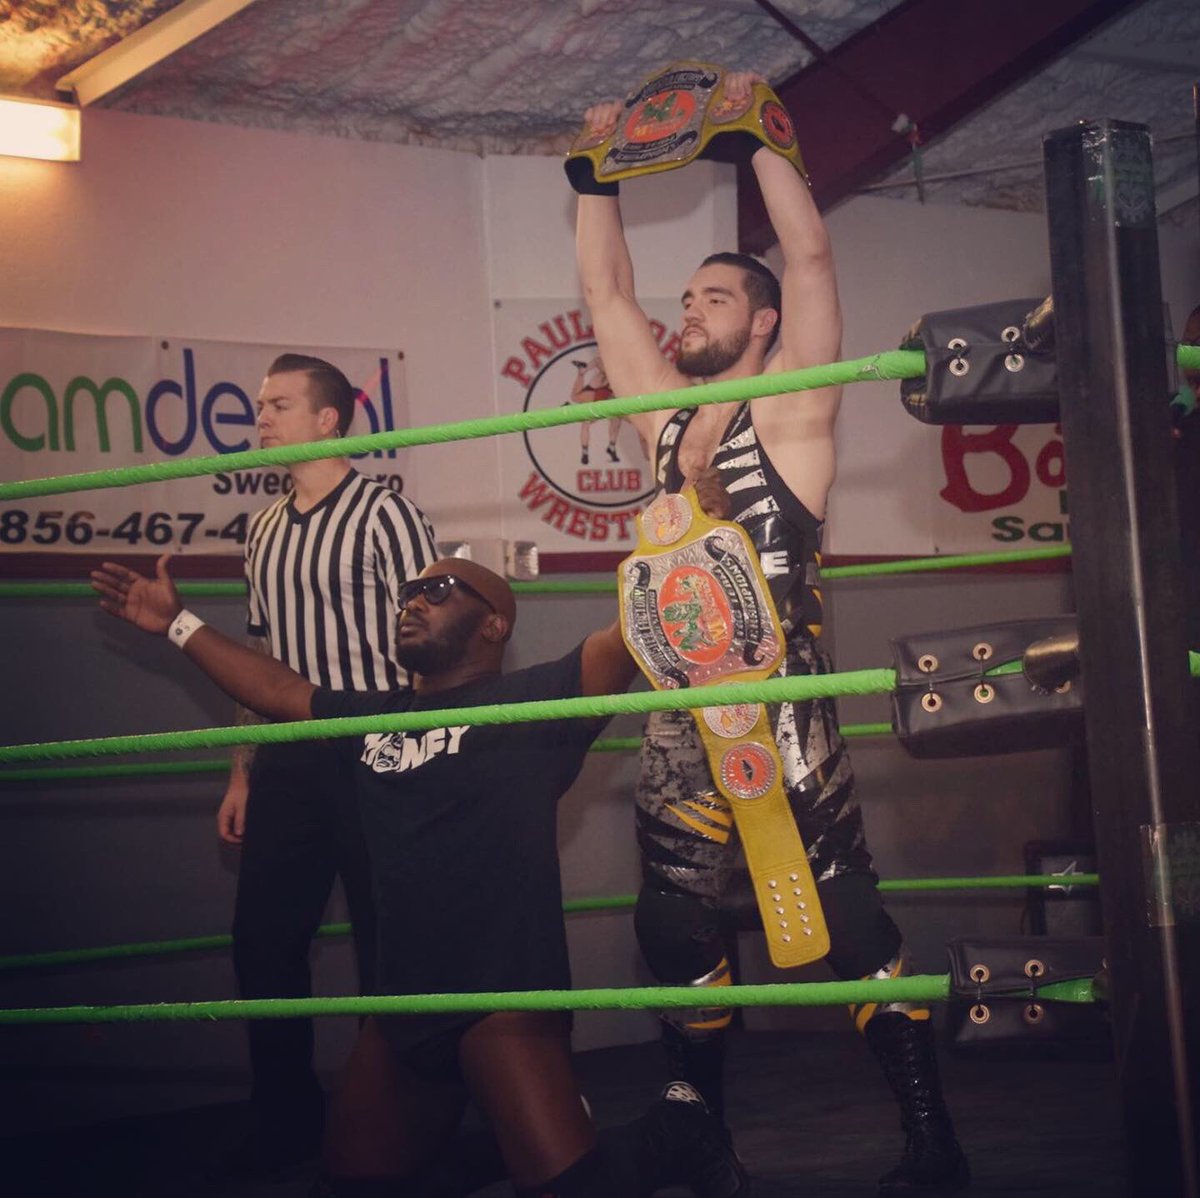 Here’s a thought, in less than 6 months as a team we have become one of the all time greatest that @TheMFPW has seen.

With that being said...

Bring on C2C #turkeyslam 

#inevitable #themfpw #monsterfactory #ProWrestling #proffesionalwrestling #bttb #indywrestling